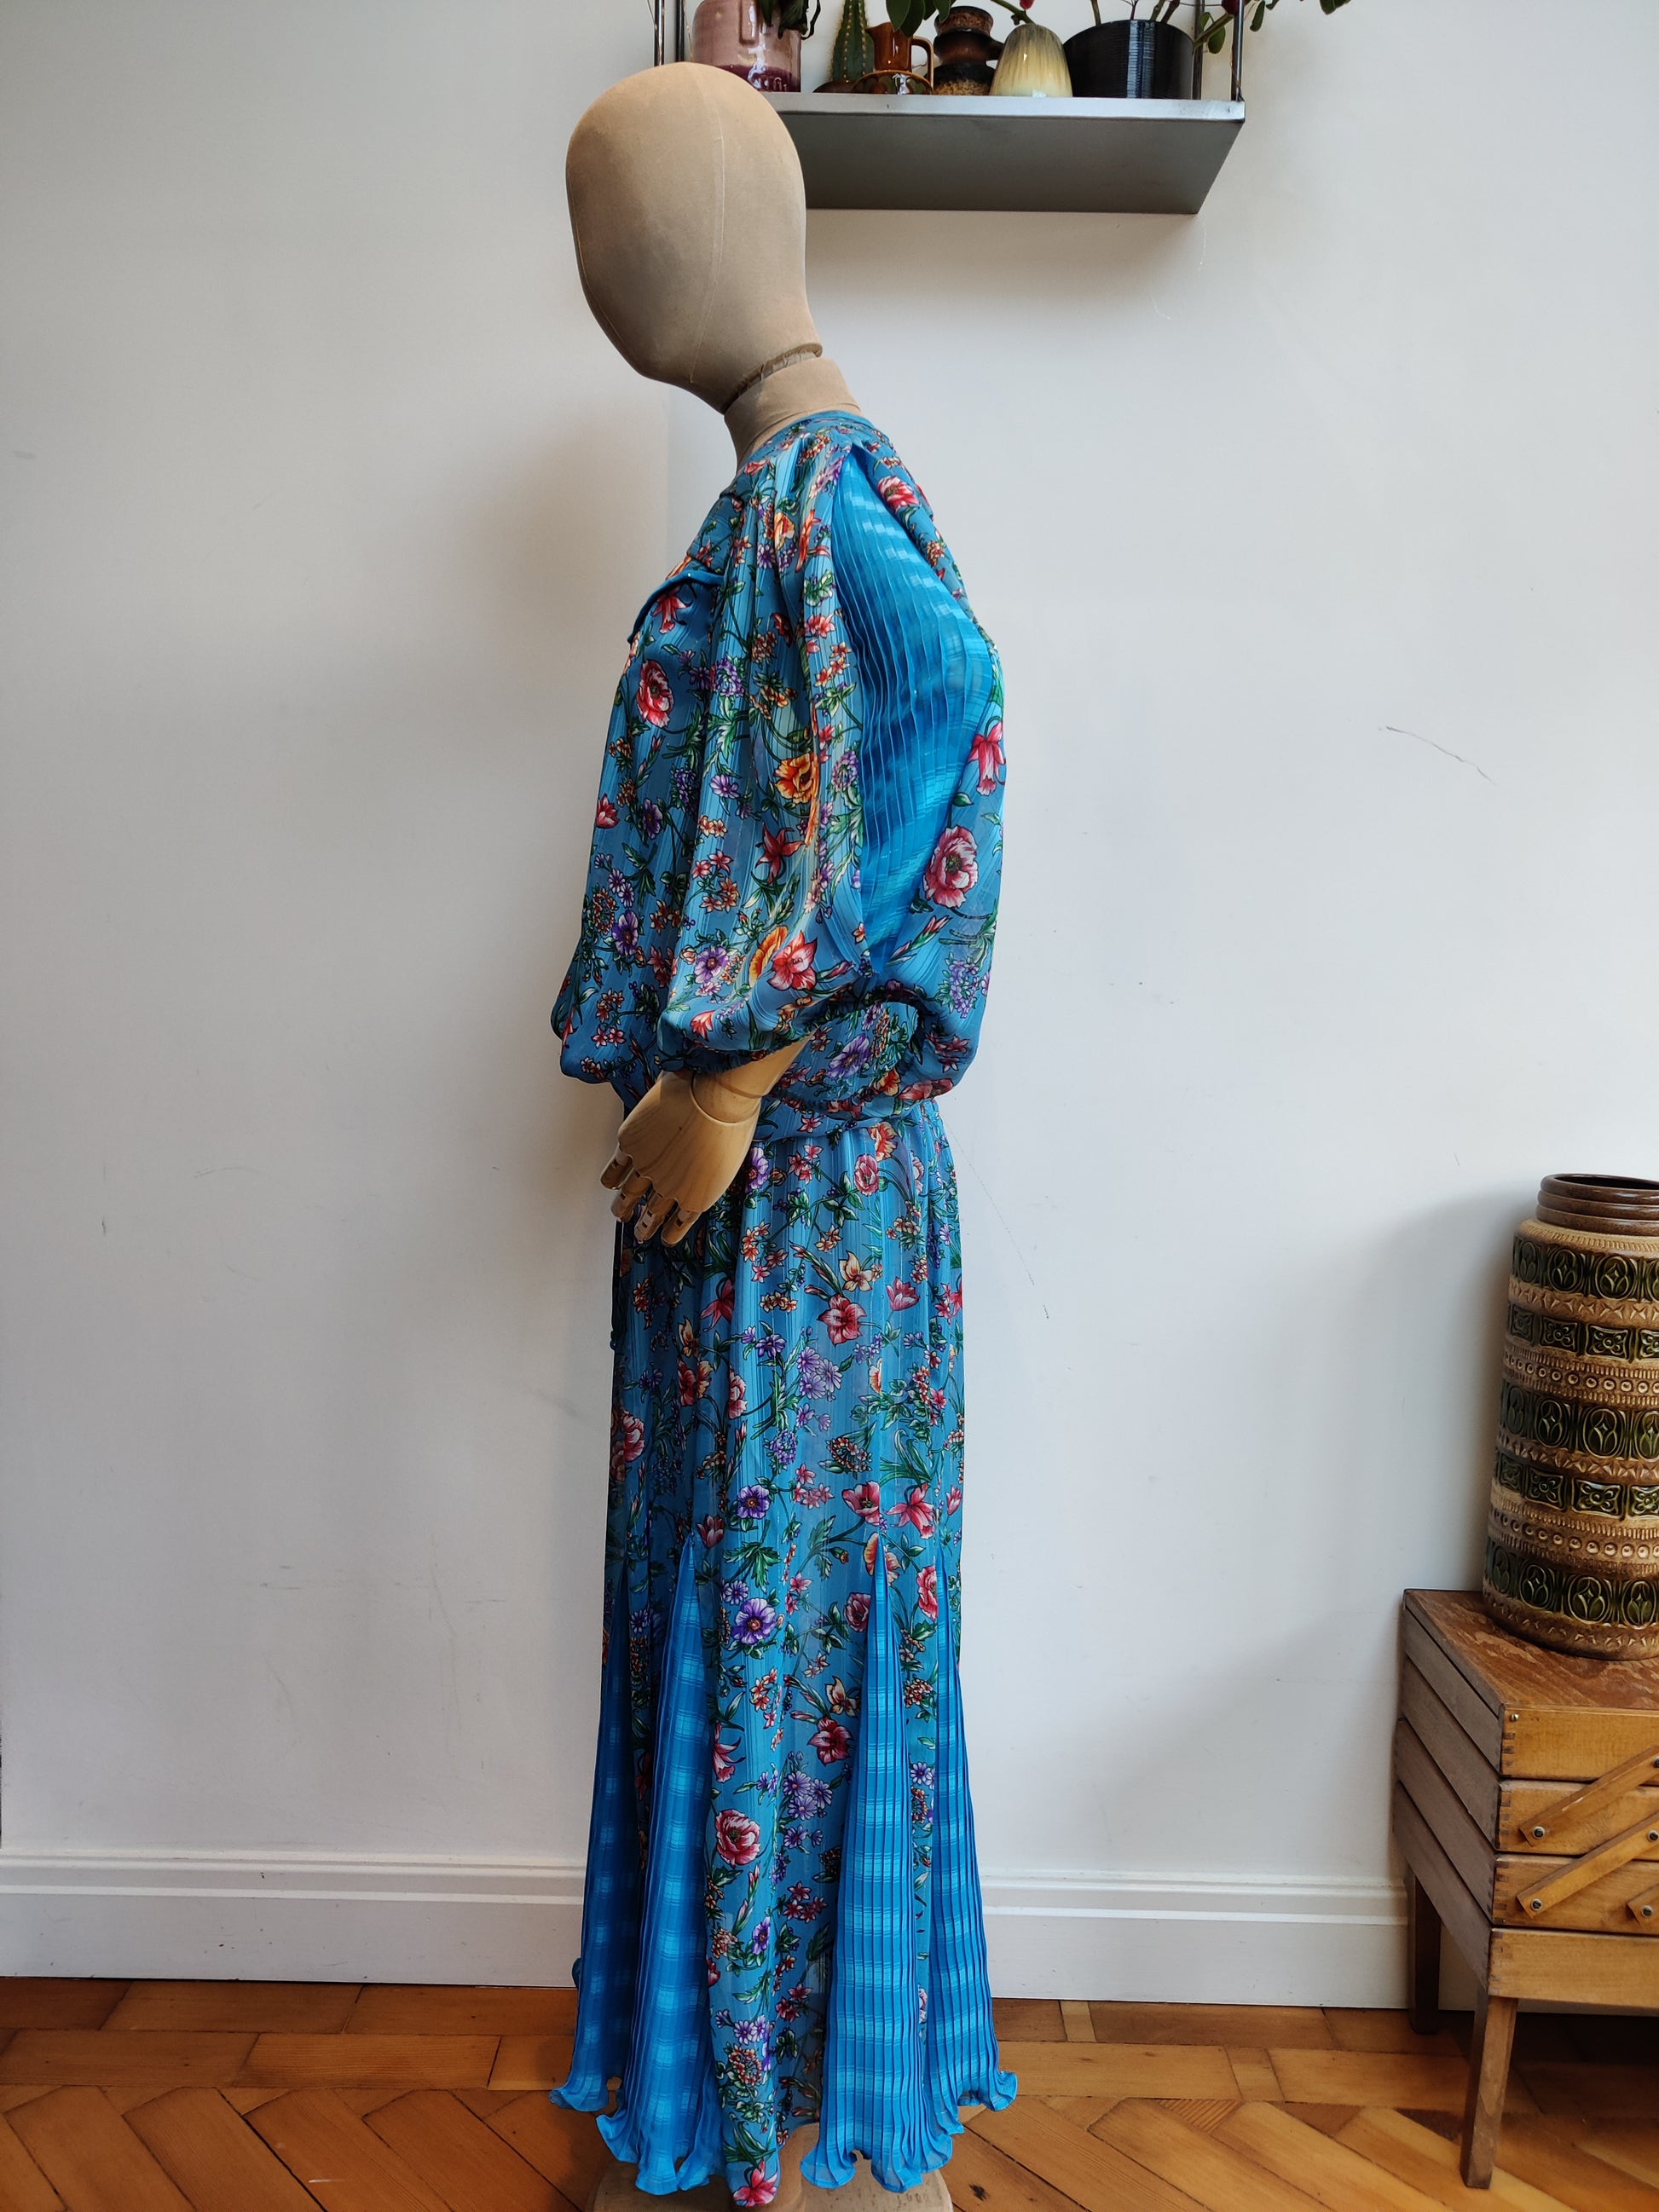 Ladies vintage outfit for a wedding in blue